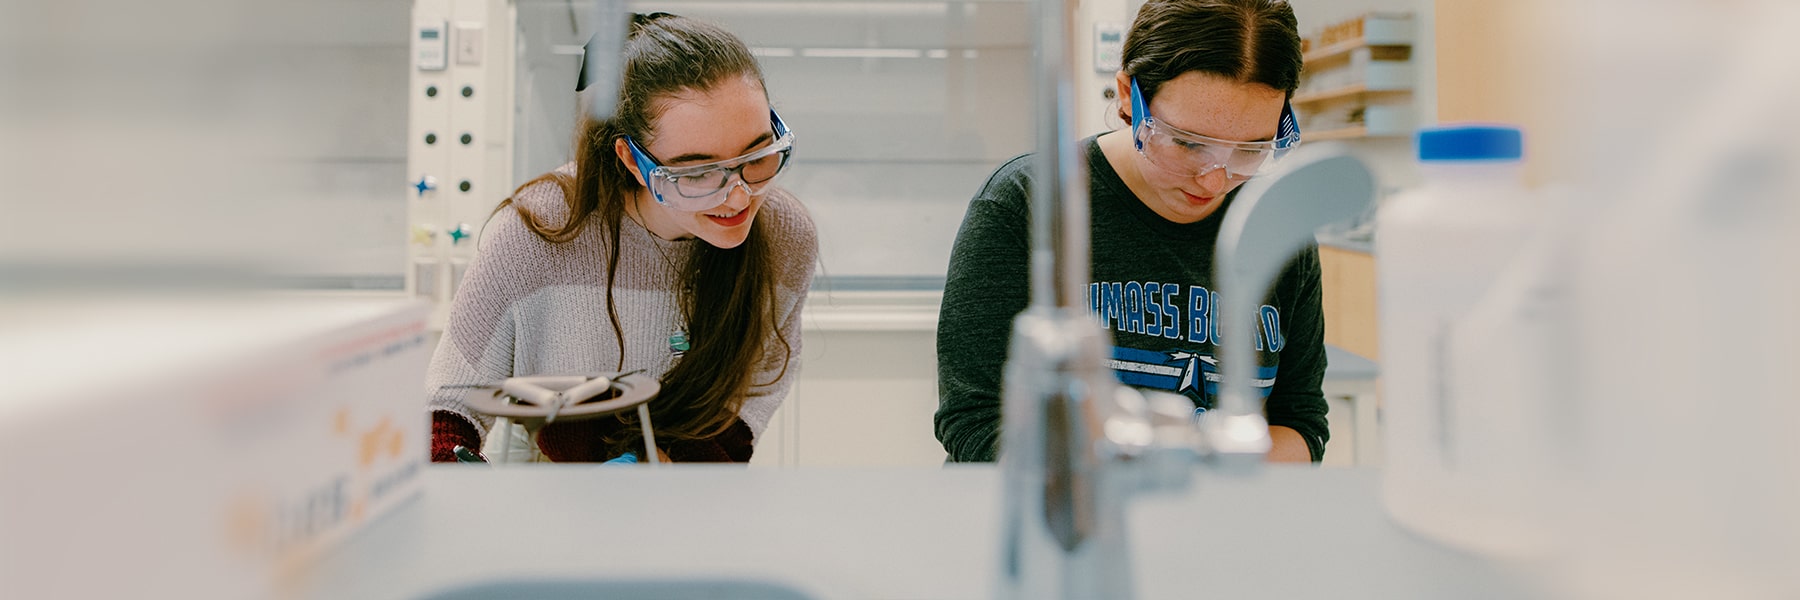 Students work in a chemistry lab on campus.